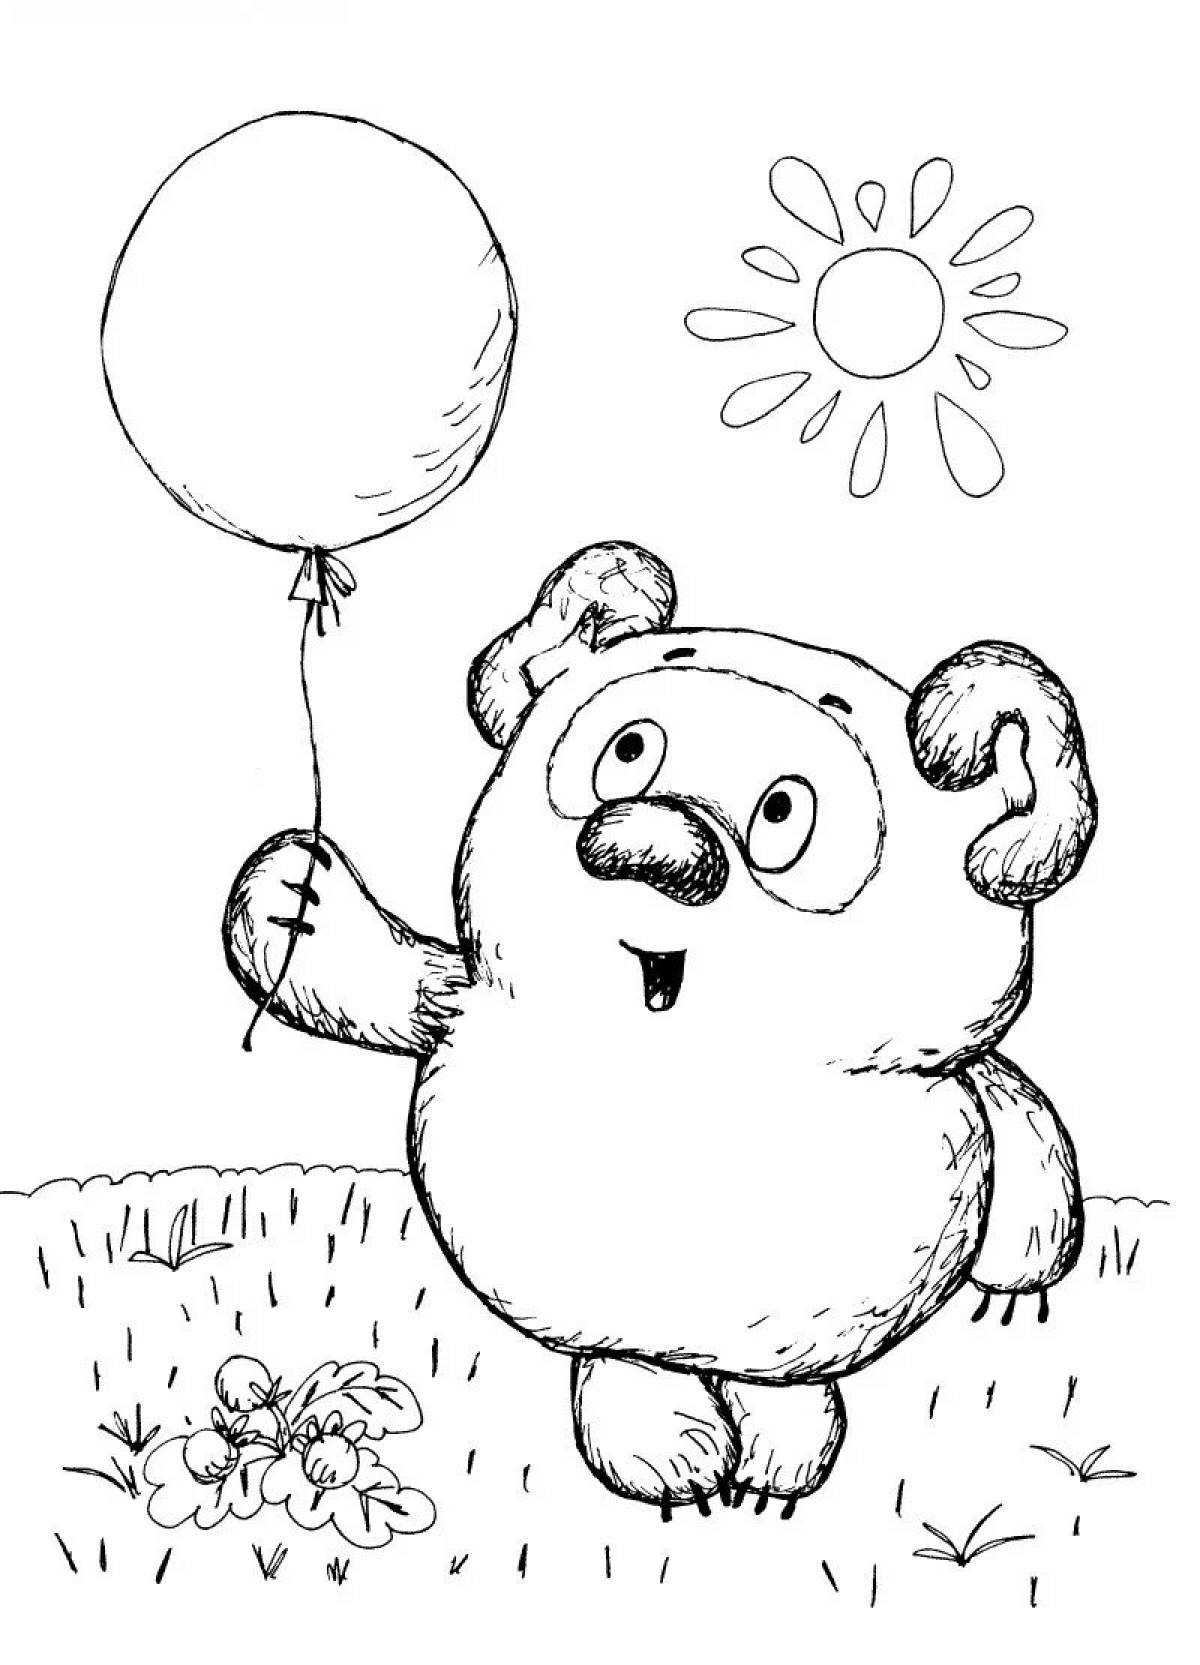 Winnie the pooh with balloon #11